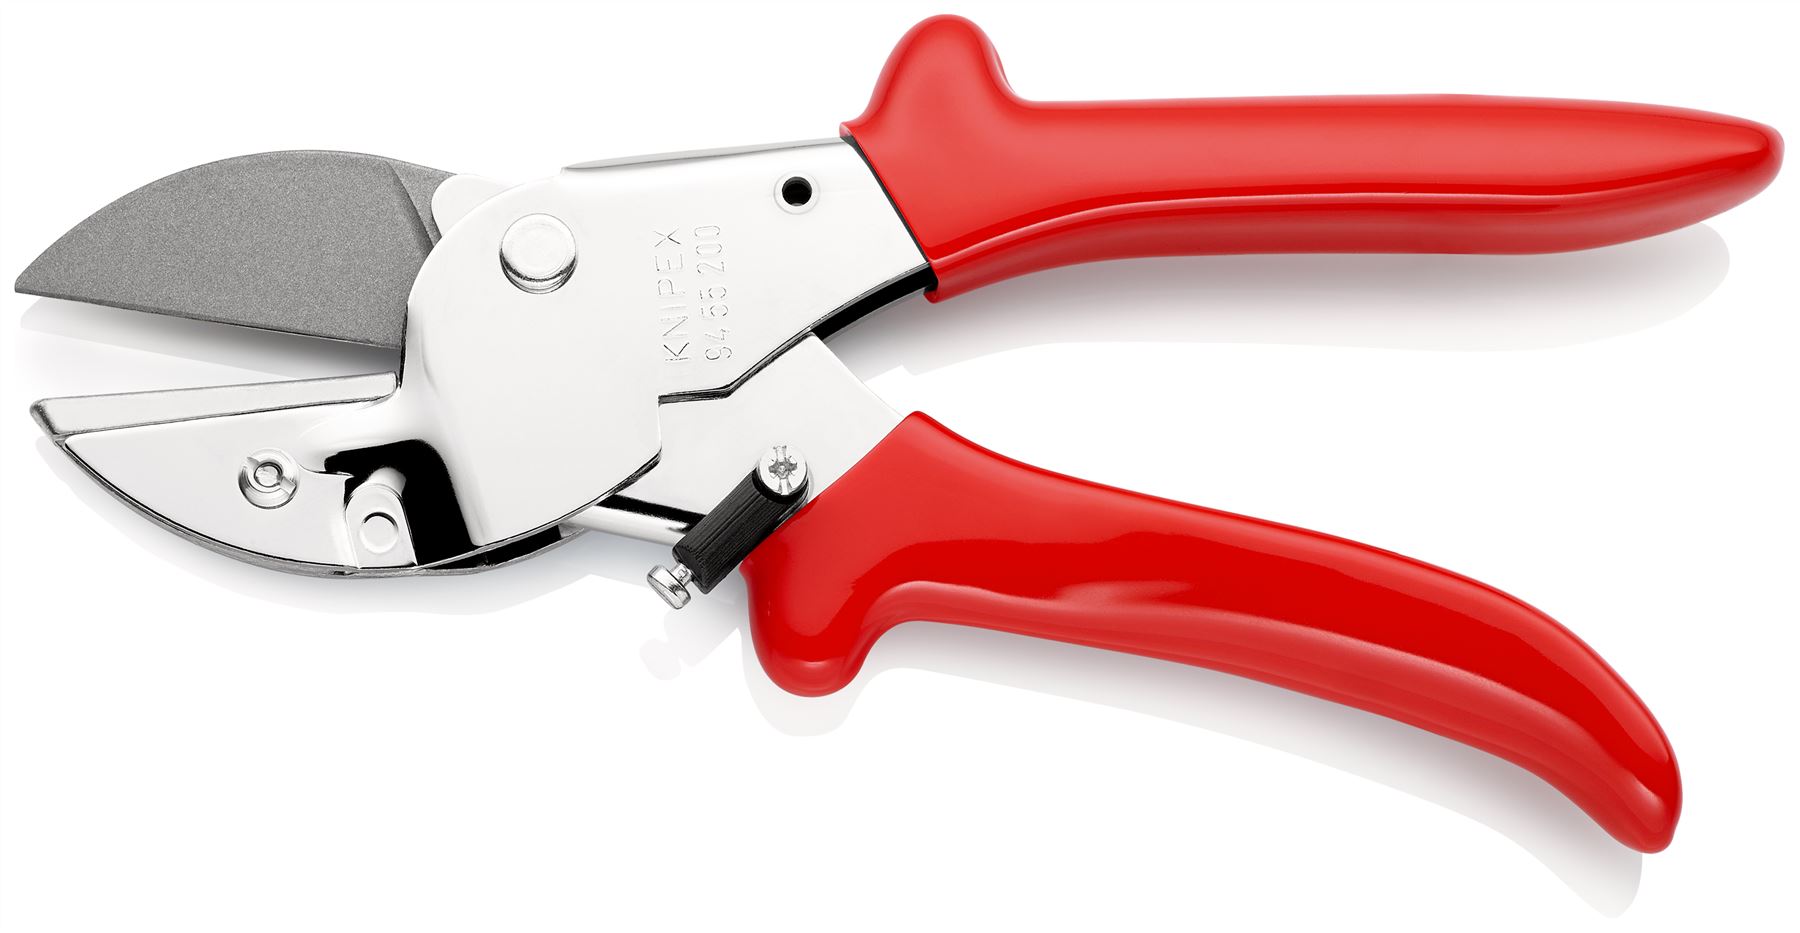 Knipex Anvil Shears 200mm Chrome Plated with Plastic Grips 94 55 200